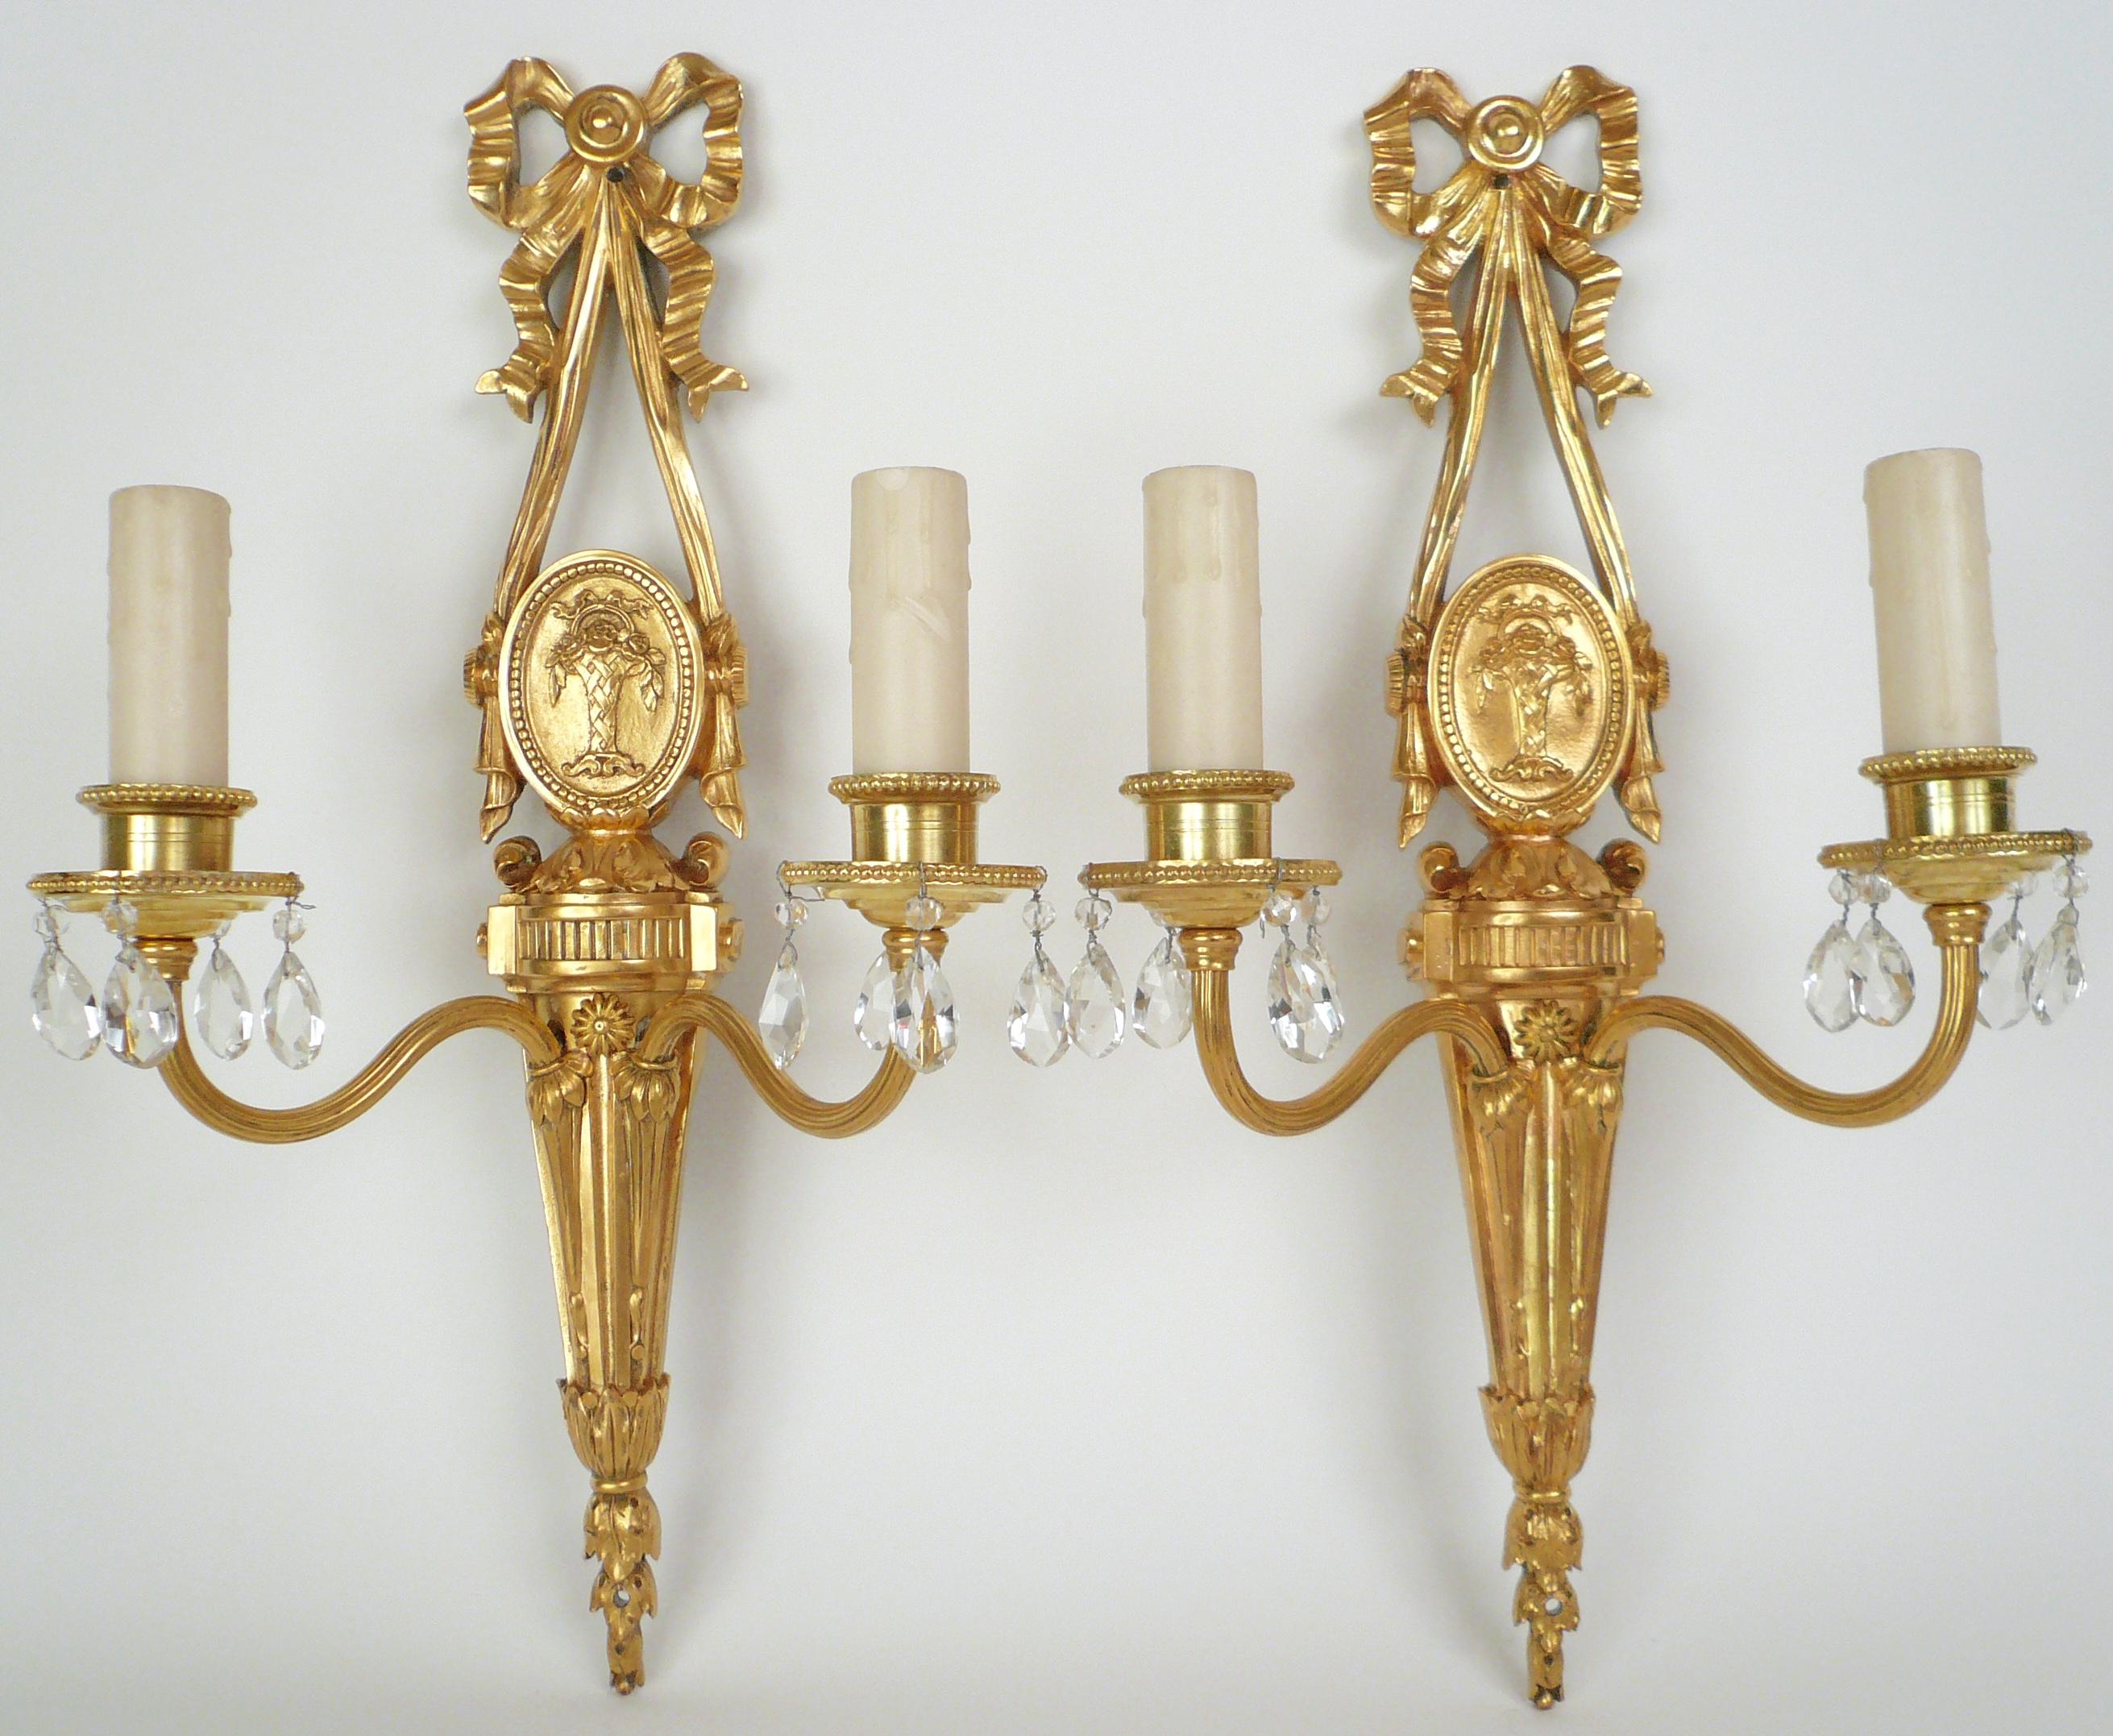 This pair of gilt bronze sconces feature Neo-Classical motifs including bowknots, acanthus leaves, and oval medallions featuring baskets of roses. They retain their original finish, and are signed Caldwell.